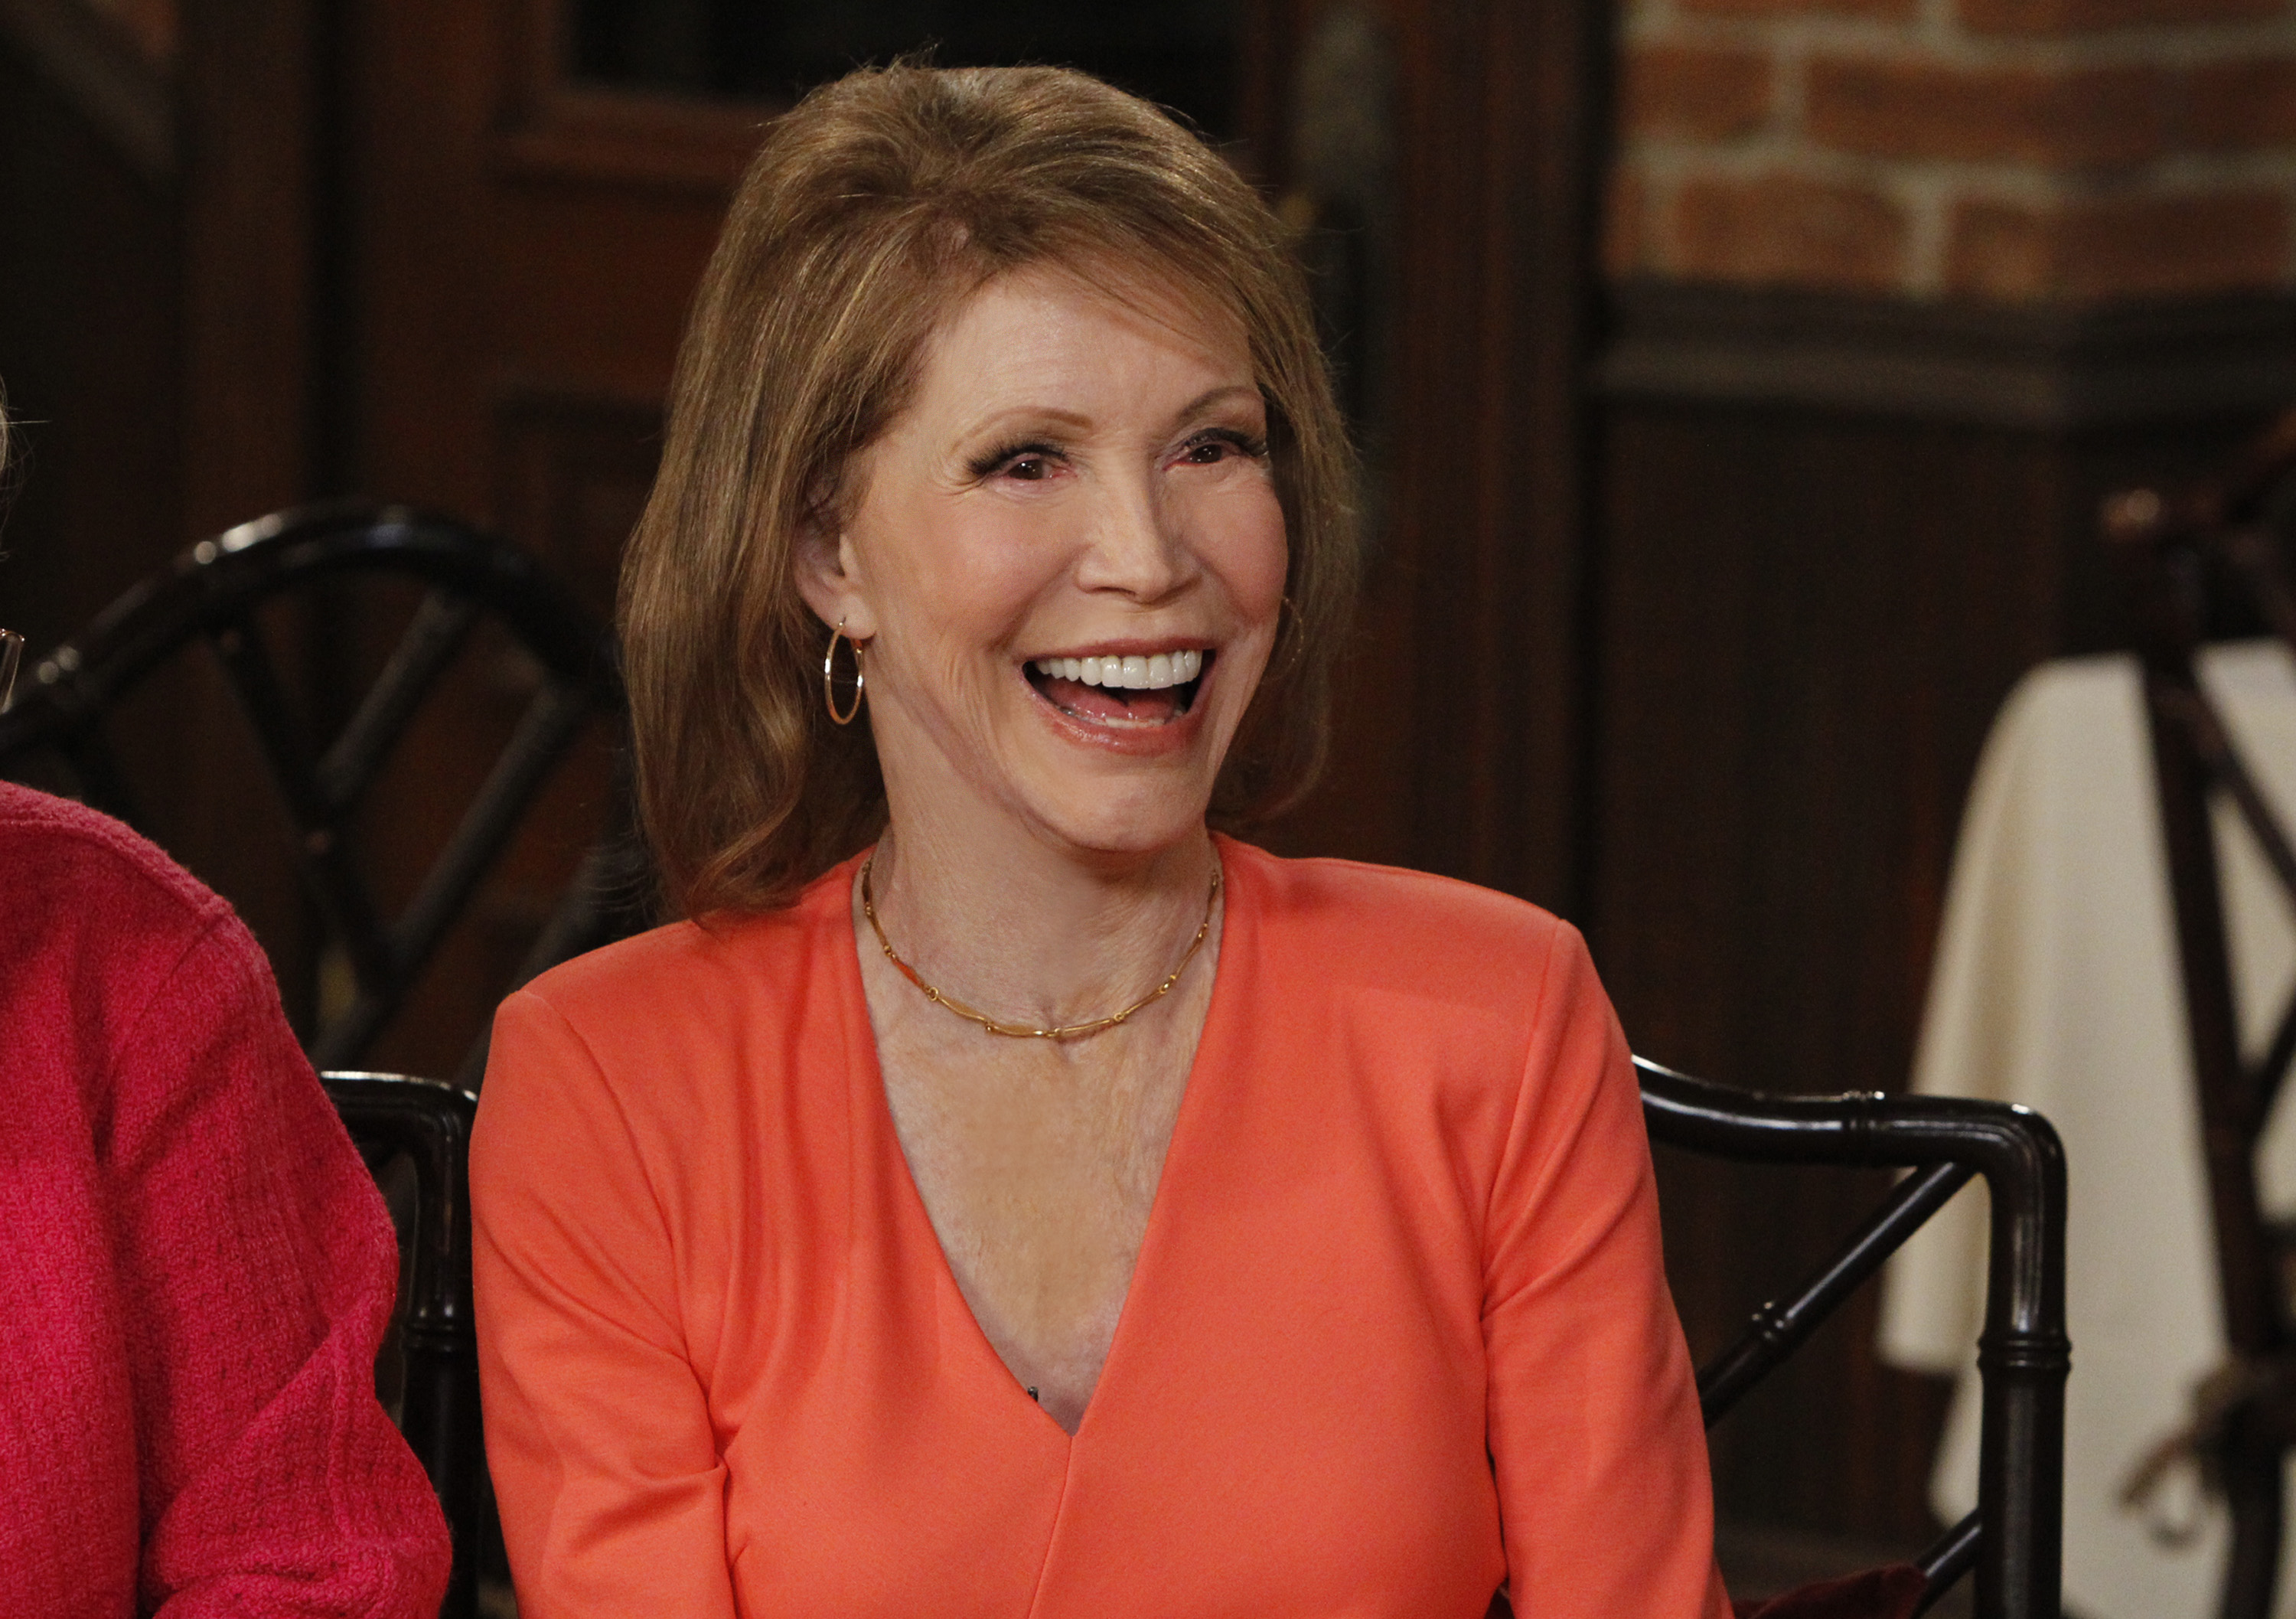 Mary Tyler Moore at the set of "Hot in Cleveland" in August 2013 | Source: Getty Images